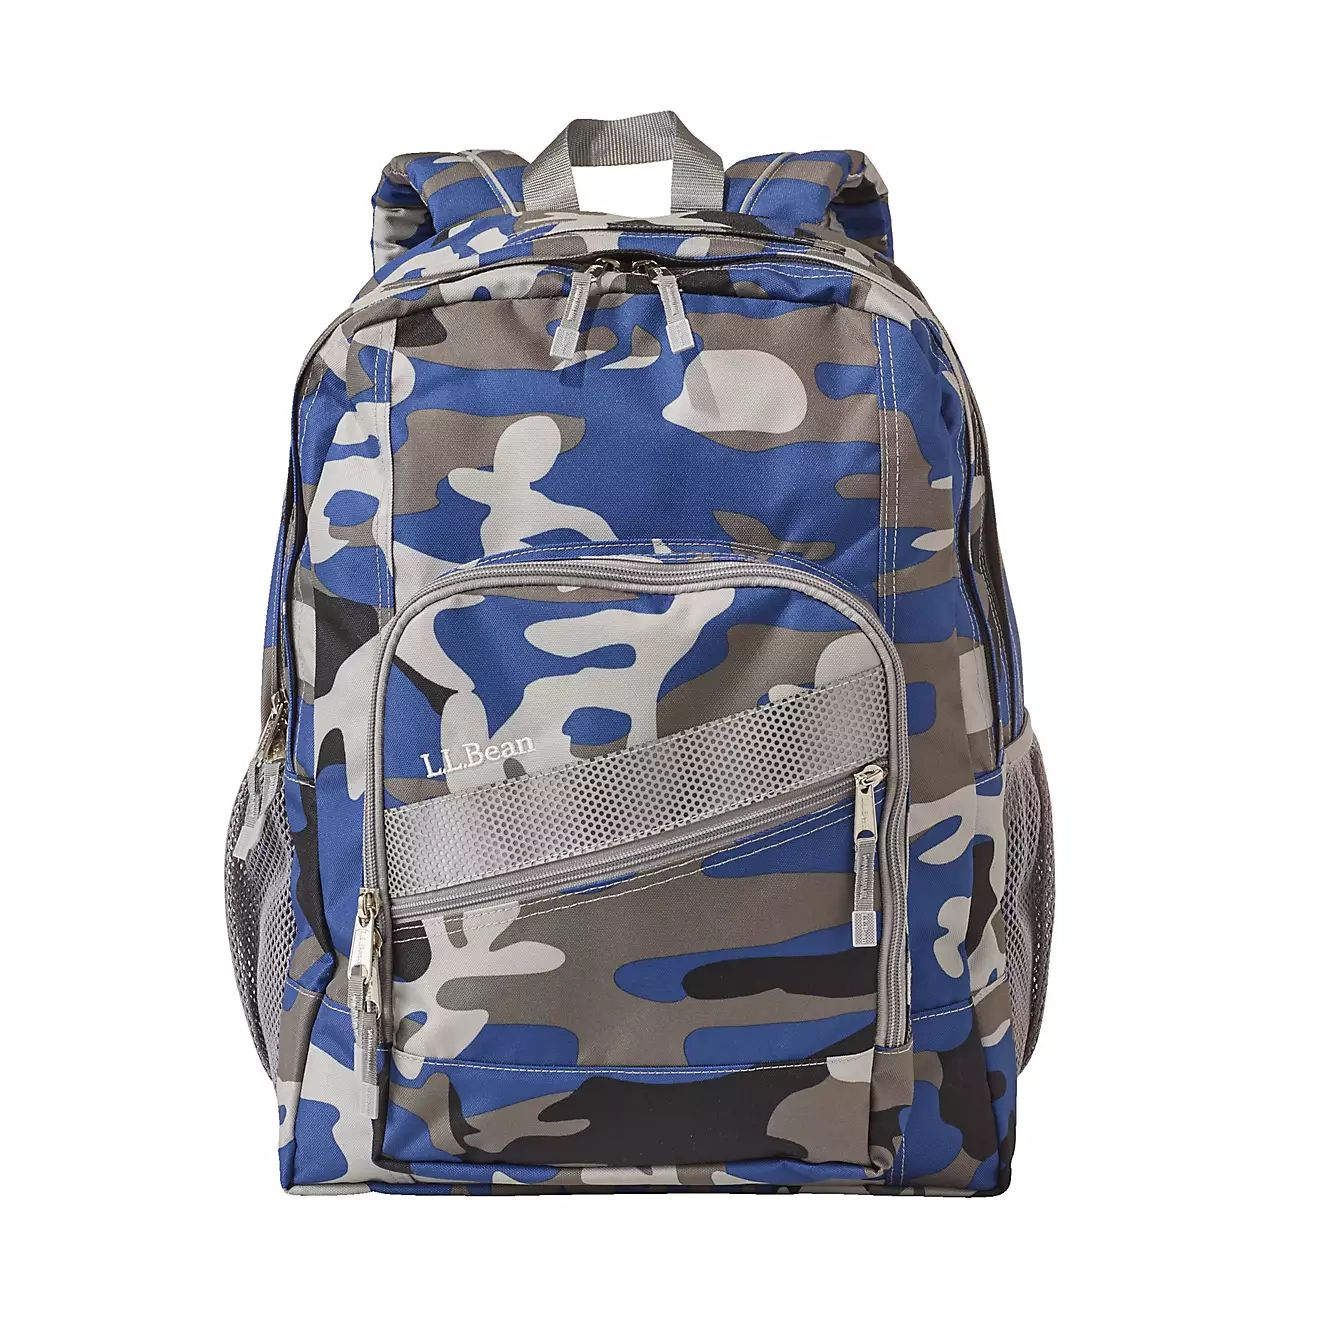 L.L.Bean Deluxe Camo Backpack | Academy Sports + Outdoors